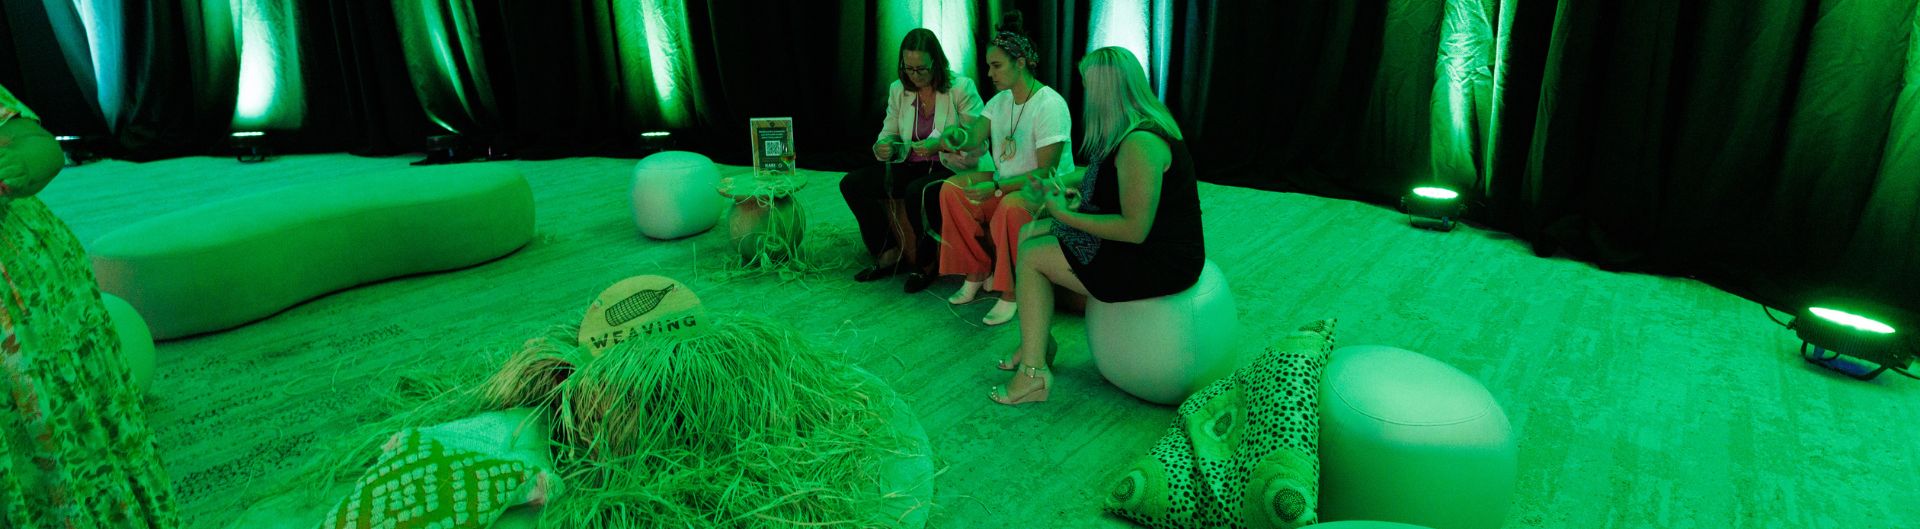 Delegates participating in a Yarning Circle at RESPECT: An ICC Sydney Experience, in a calming green filled room.